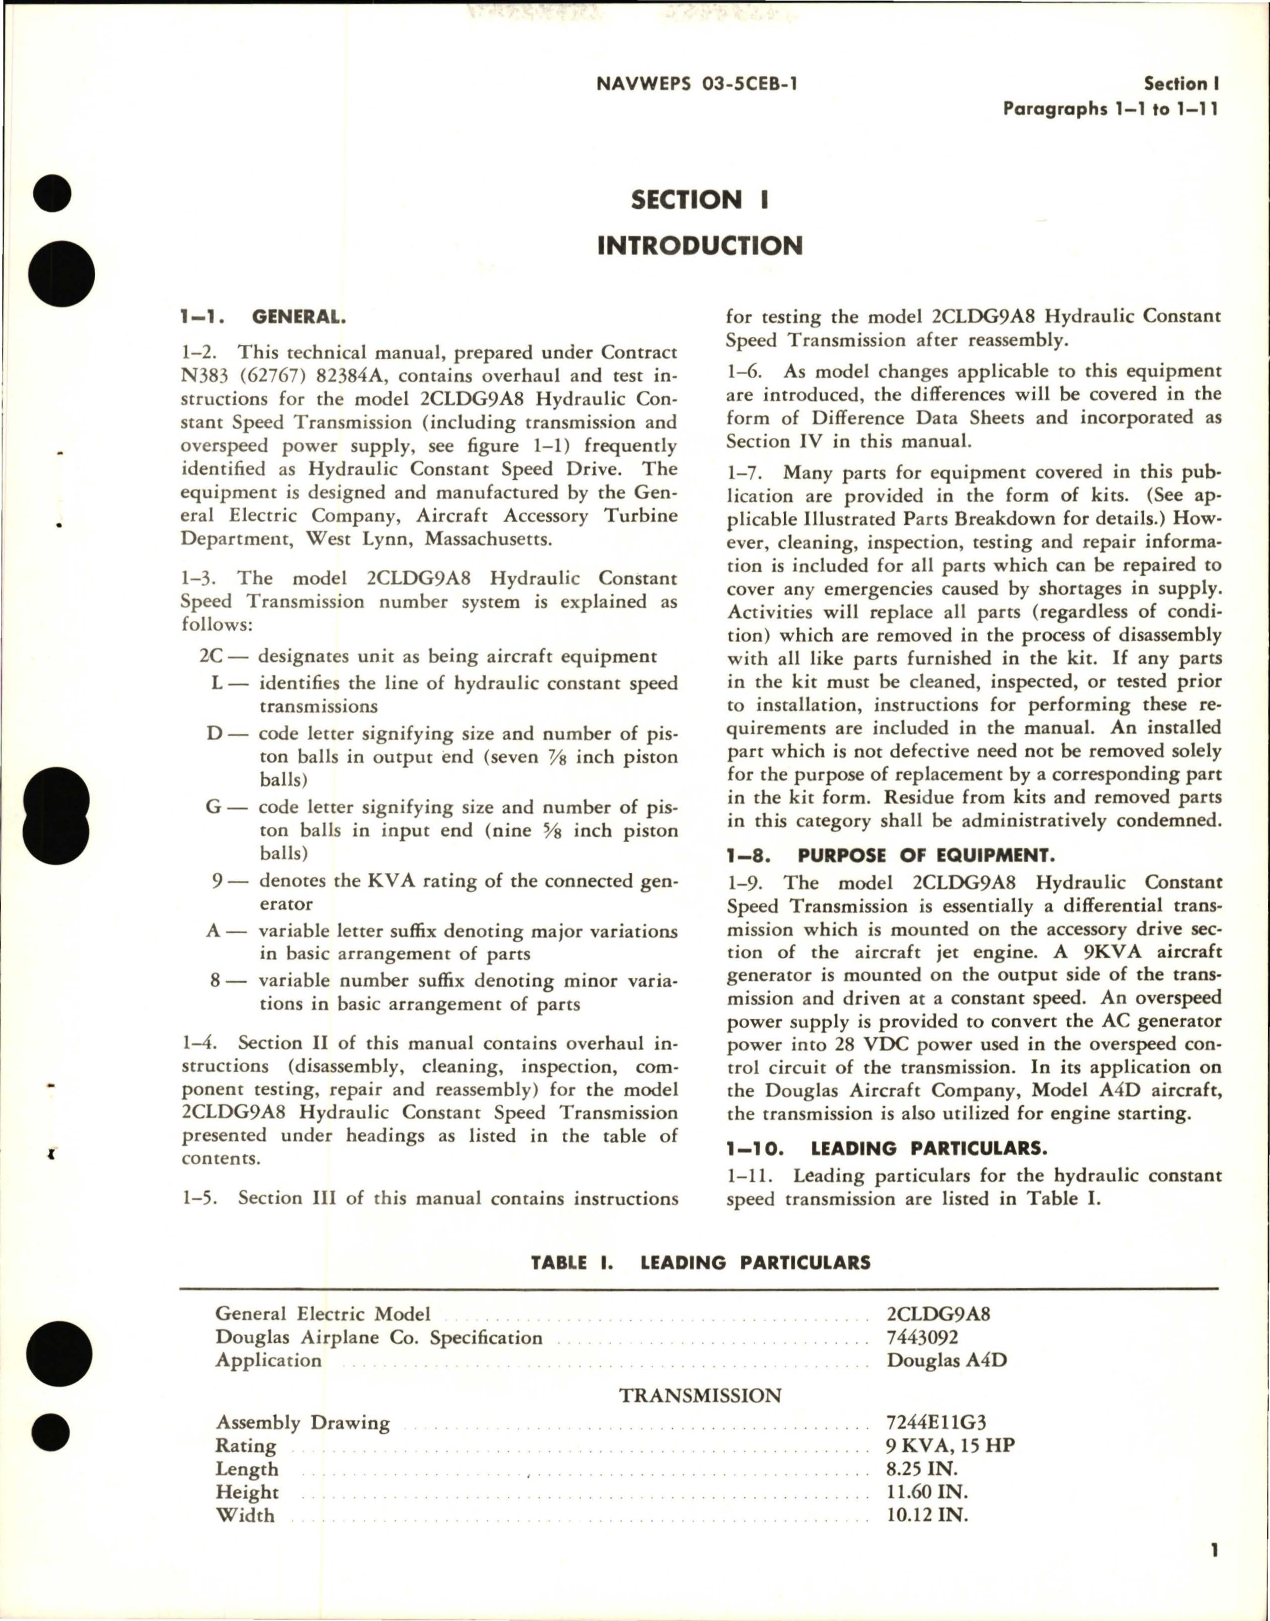 Sample page 5 from AirCorps Library document: Overhaul Instructions for Hydraulic Constant Speed Transmission - Model 2CLDG9A8